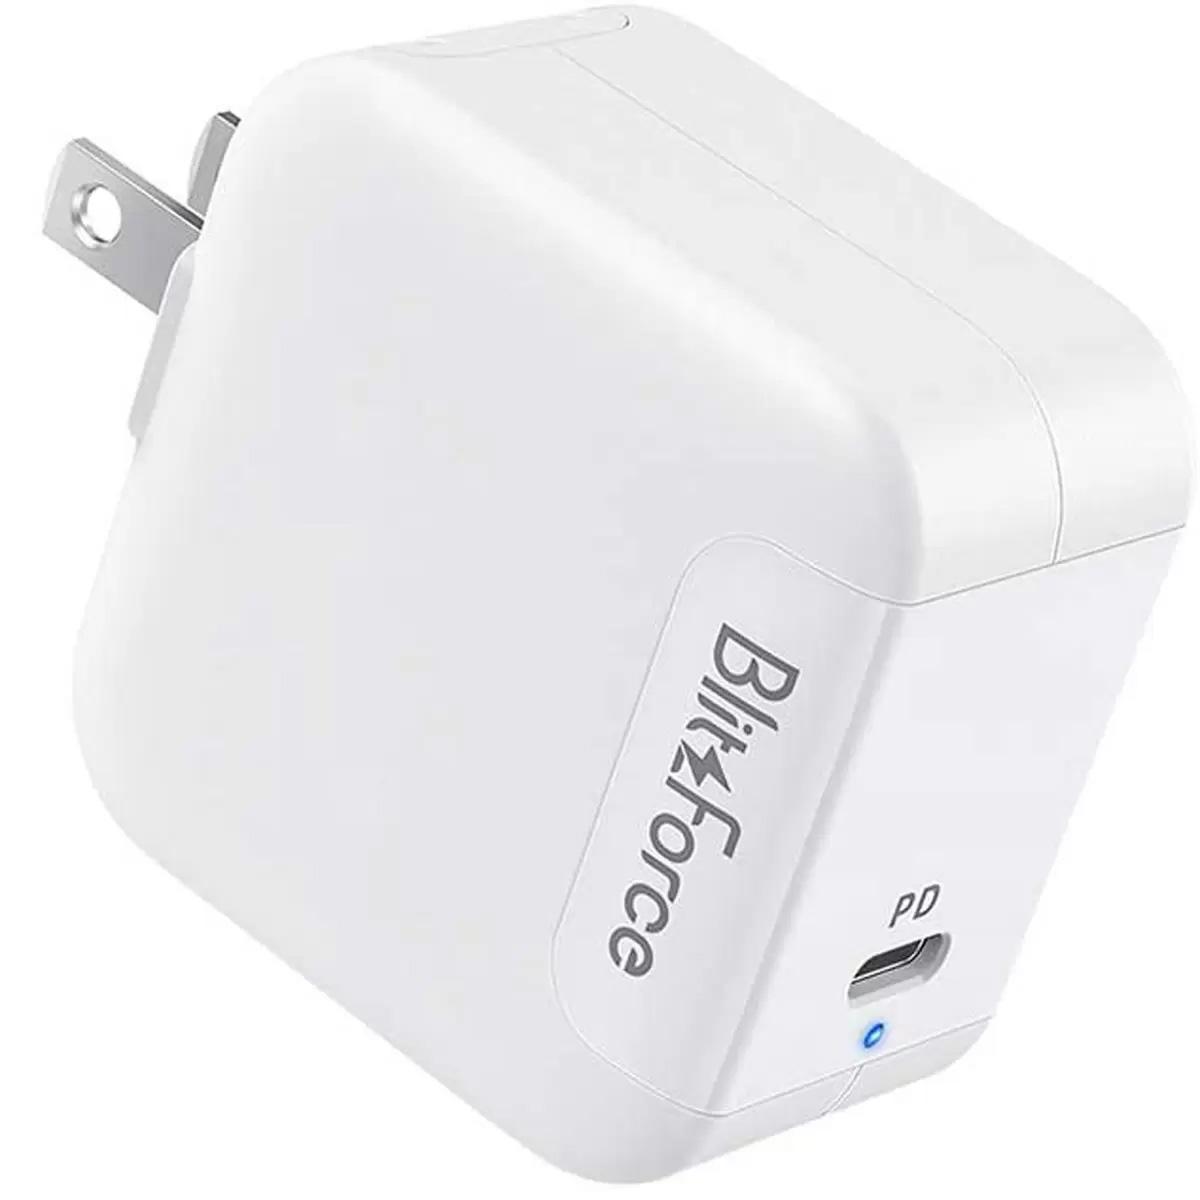 Apple iPhone 12 + MacBook USB-C 65W 20W Wall Charger for $8.49